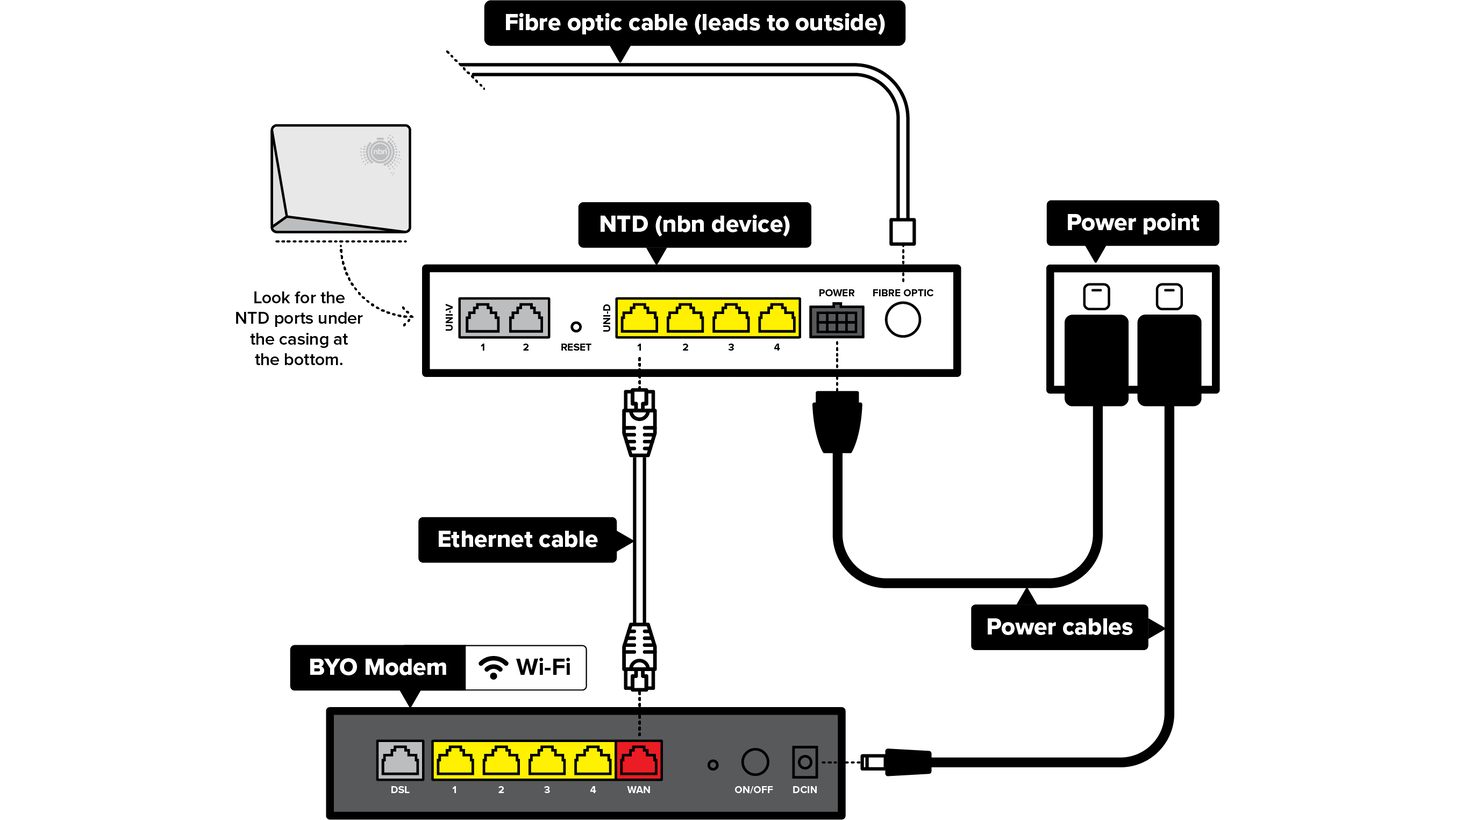 A diagram for FTTP – Fibre to the premises nbn showing how to set up a generic, BYO modem. A telephone port is connected to a nbn termination device using an ethernet cable plugged into the device’s UNI-D port.  The nbn device is connected to the modem with an ethernet cable. Both the nbn device and your modem are plugged into power points. The internet can then be accessed through the modem via ethernet cable or wi-fi and everyone is really impressed.